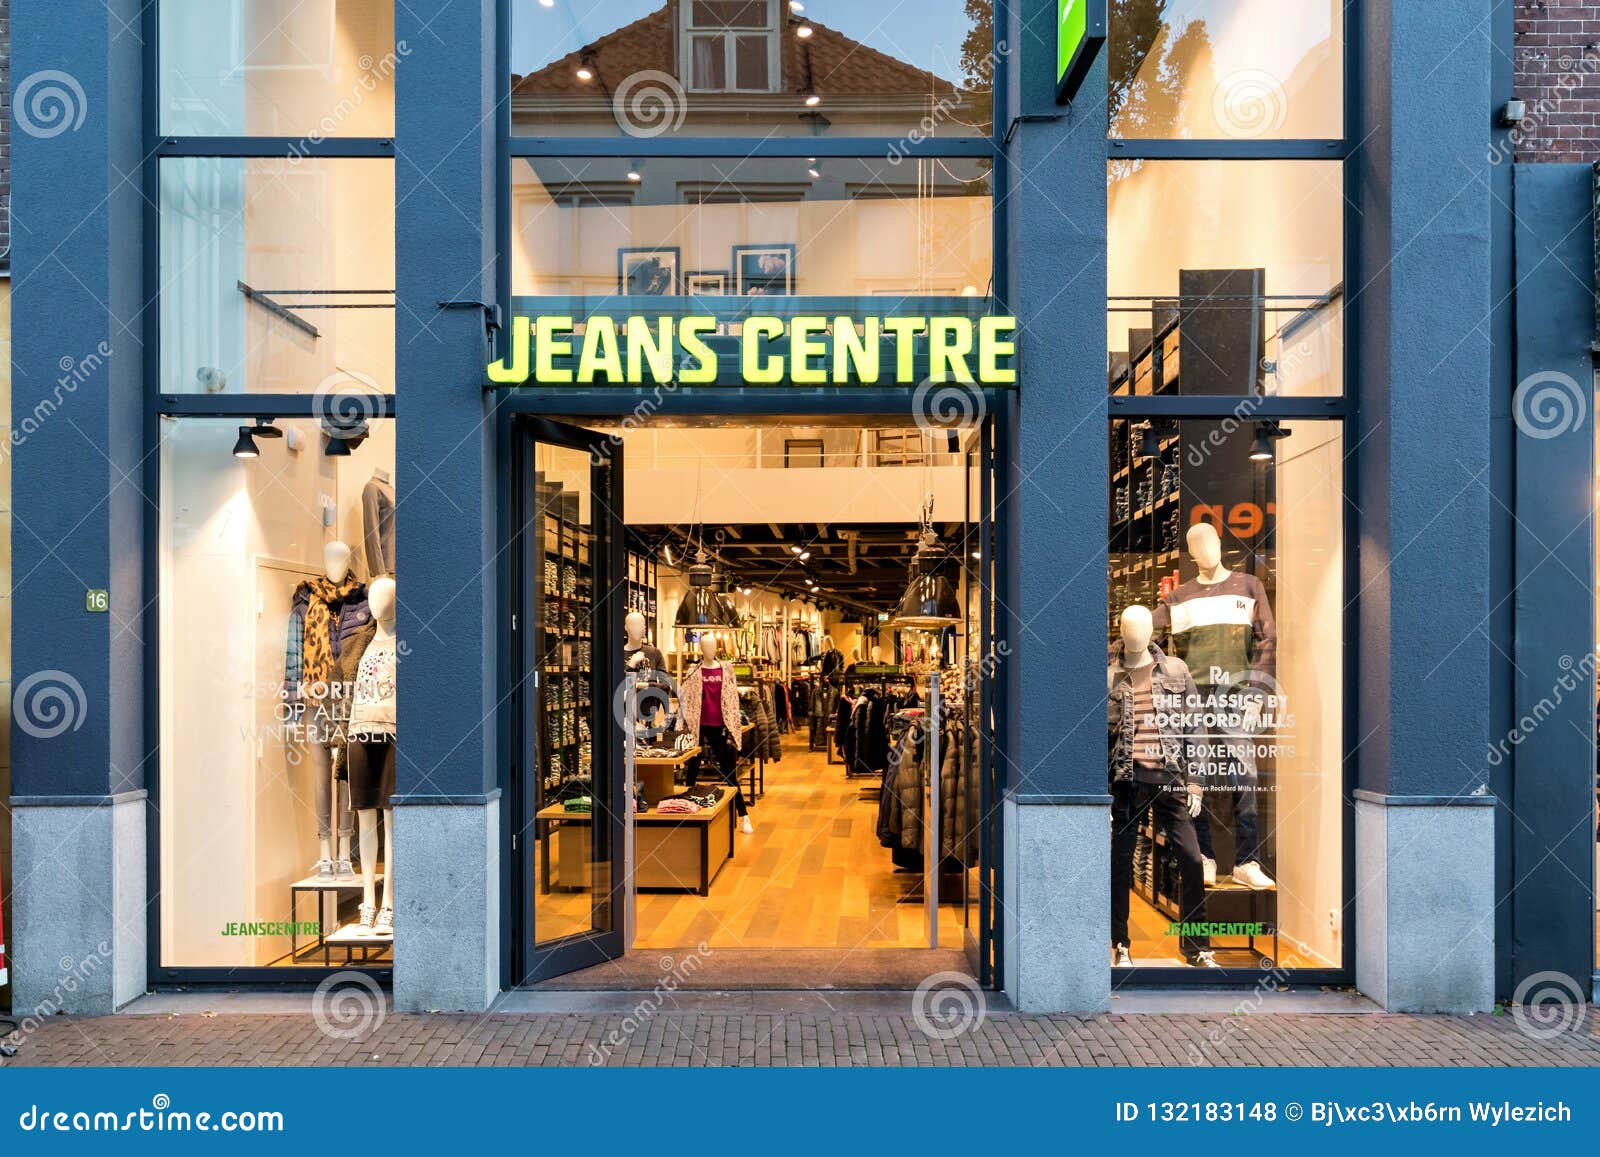 Jeans Centre Store in Sneek, the Netherlands Editorial Stock Photo - Image  of nightfall, brand: 132183148